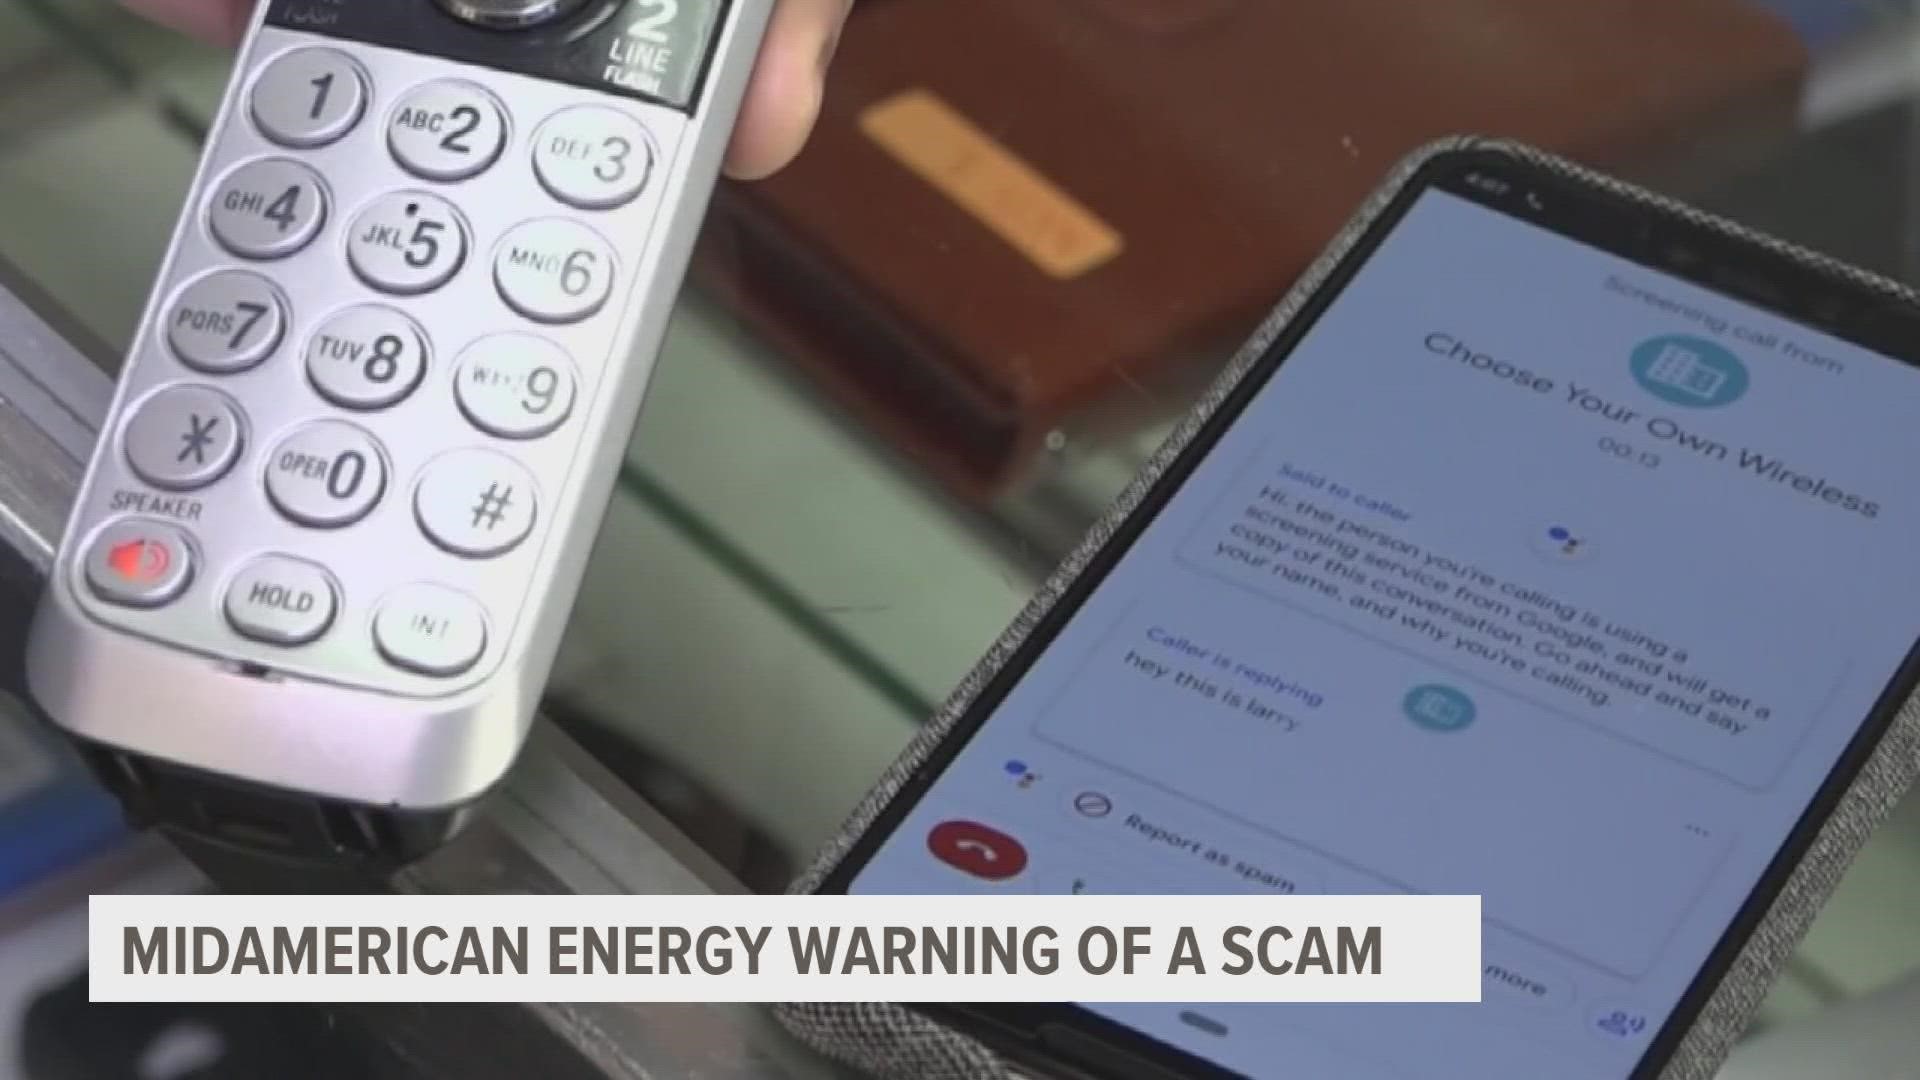 The callers threaten to shut off power within the hour unless the customer makes an immediate payment over the phone.